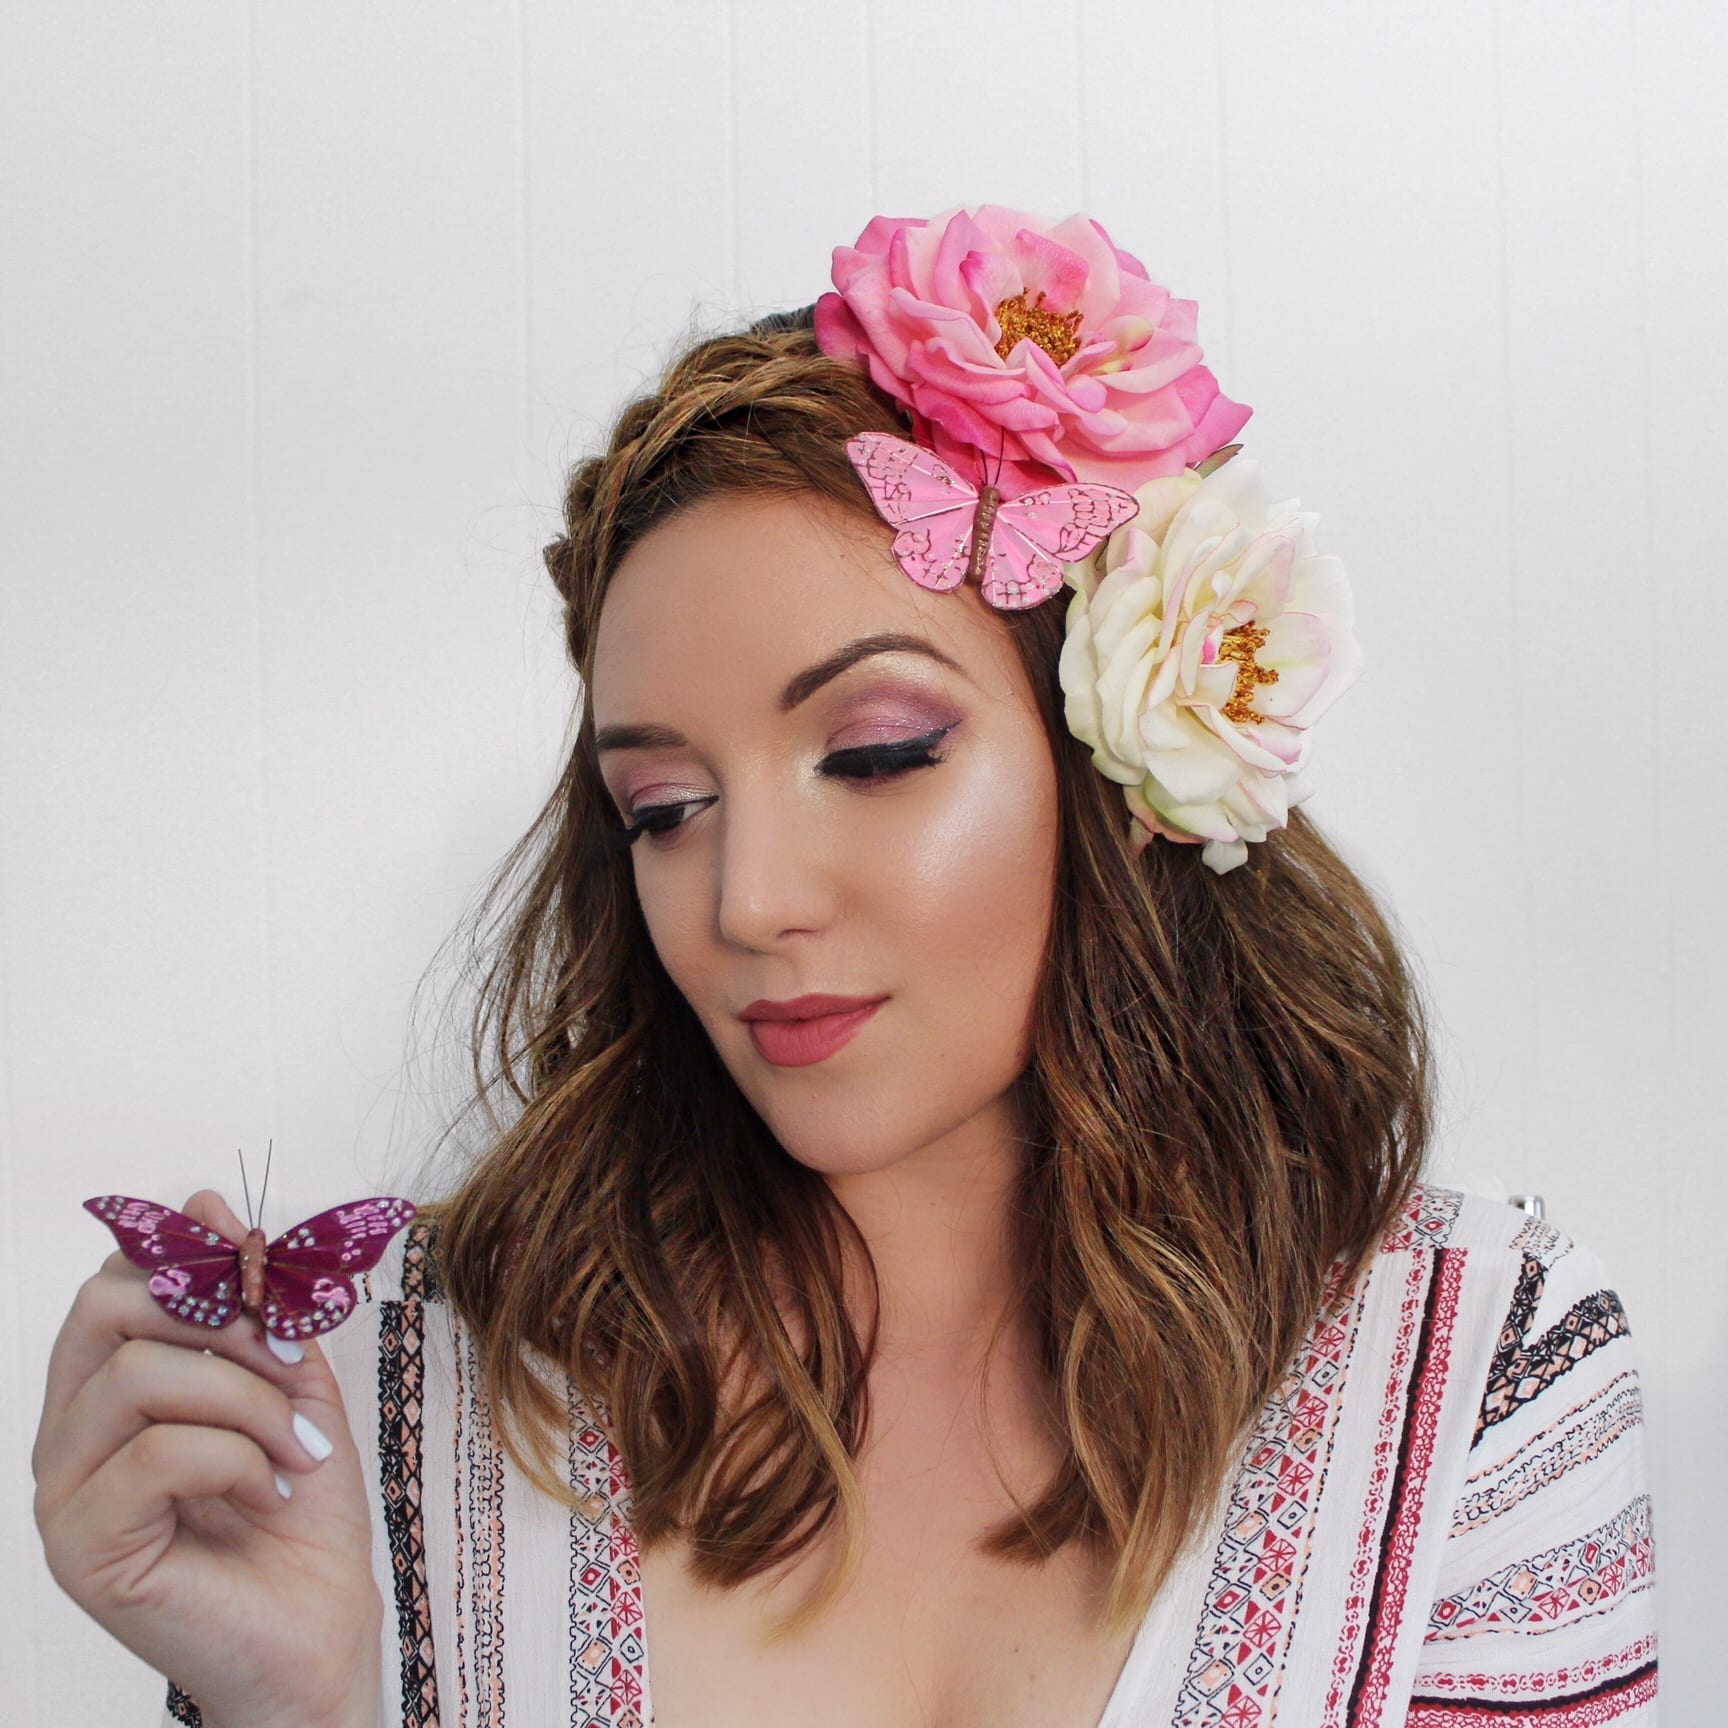 DIY HALLOWEEN HAIR AND MAKEUP IDEAS: the Fleek Fairy featured by popular San Francisco style blogger, Just Add Glam